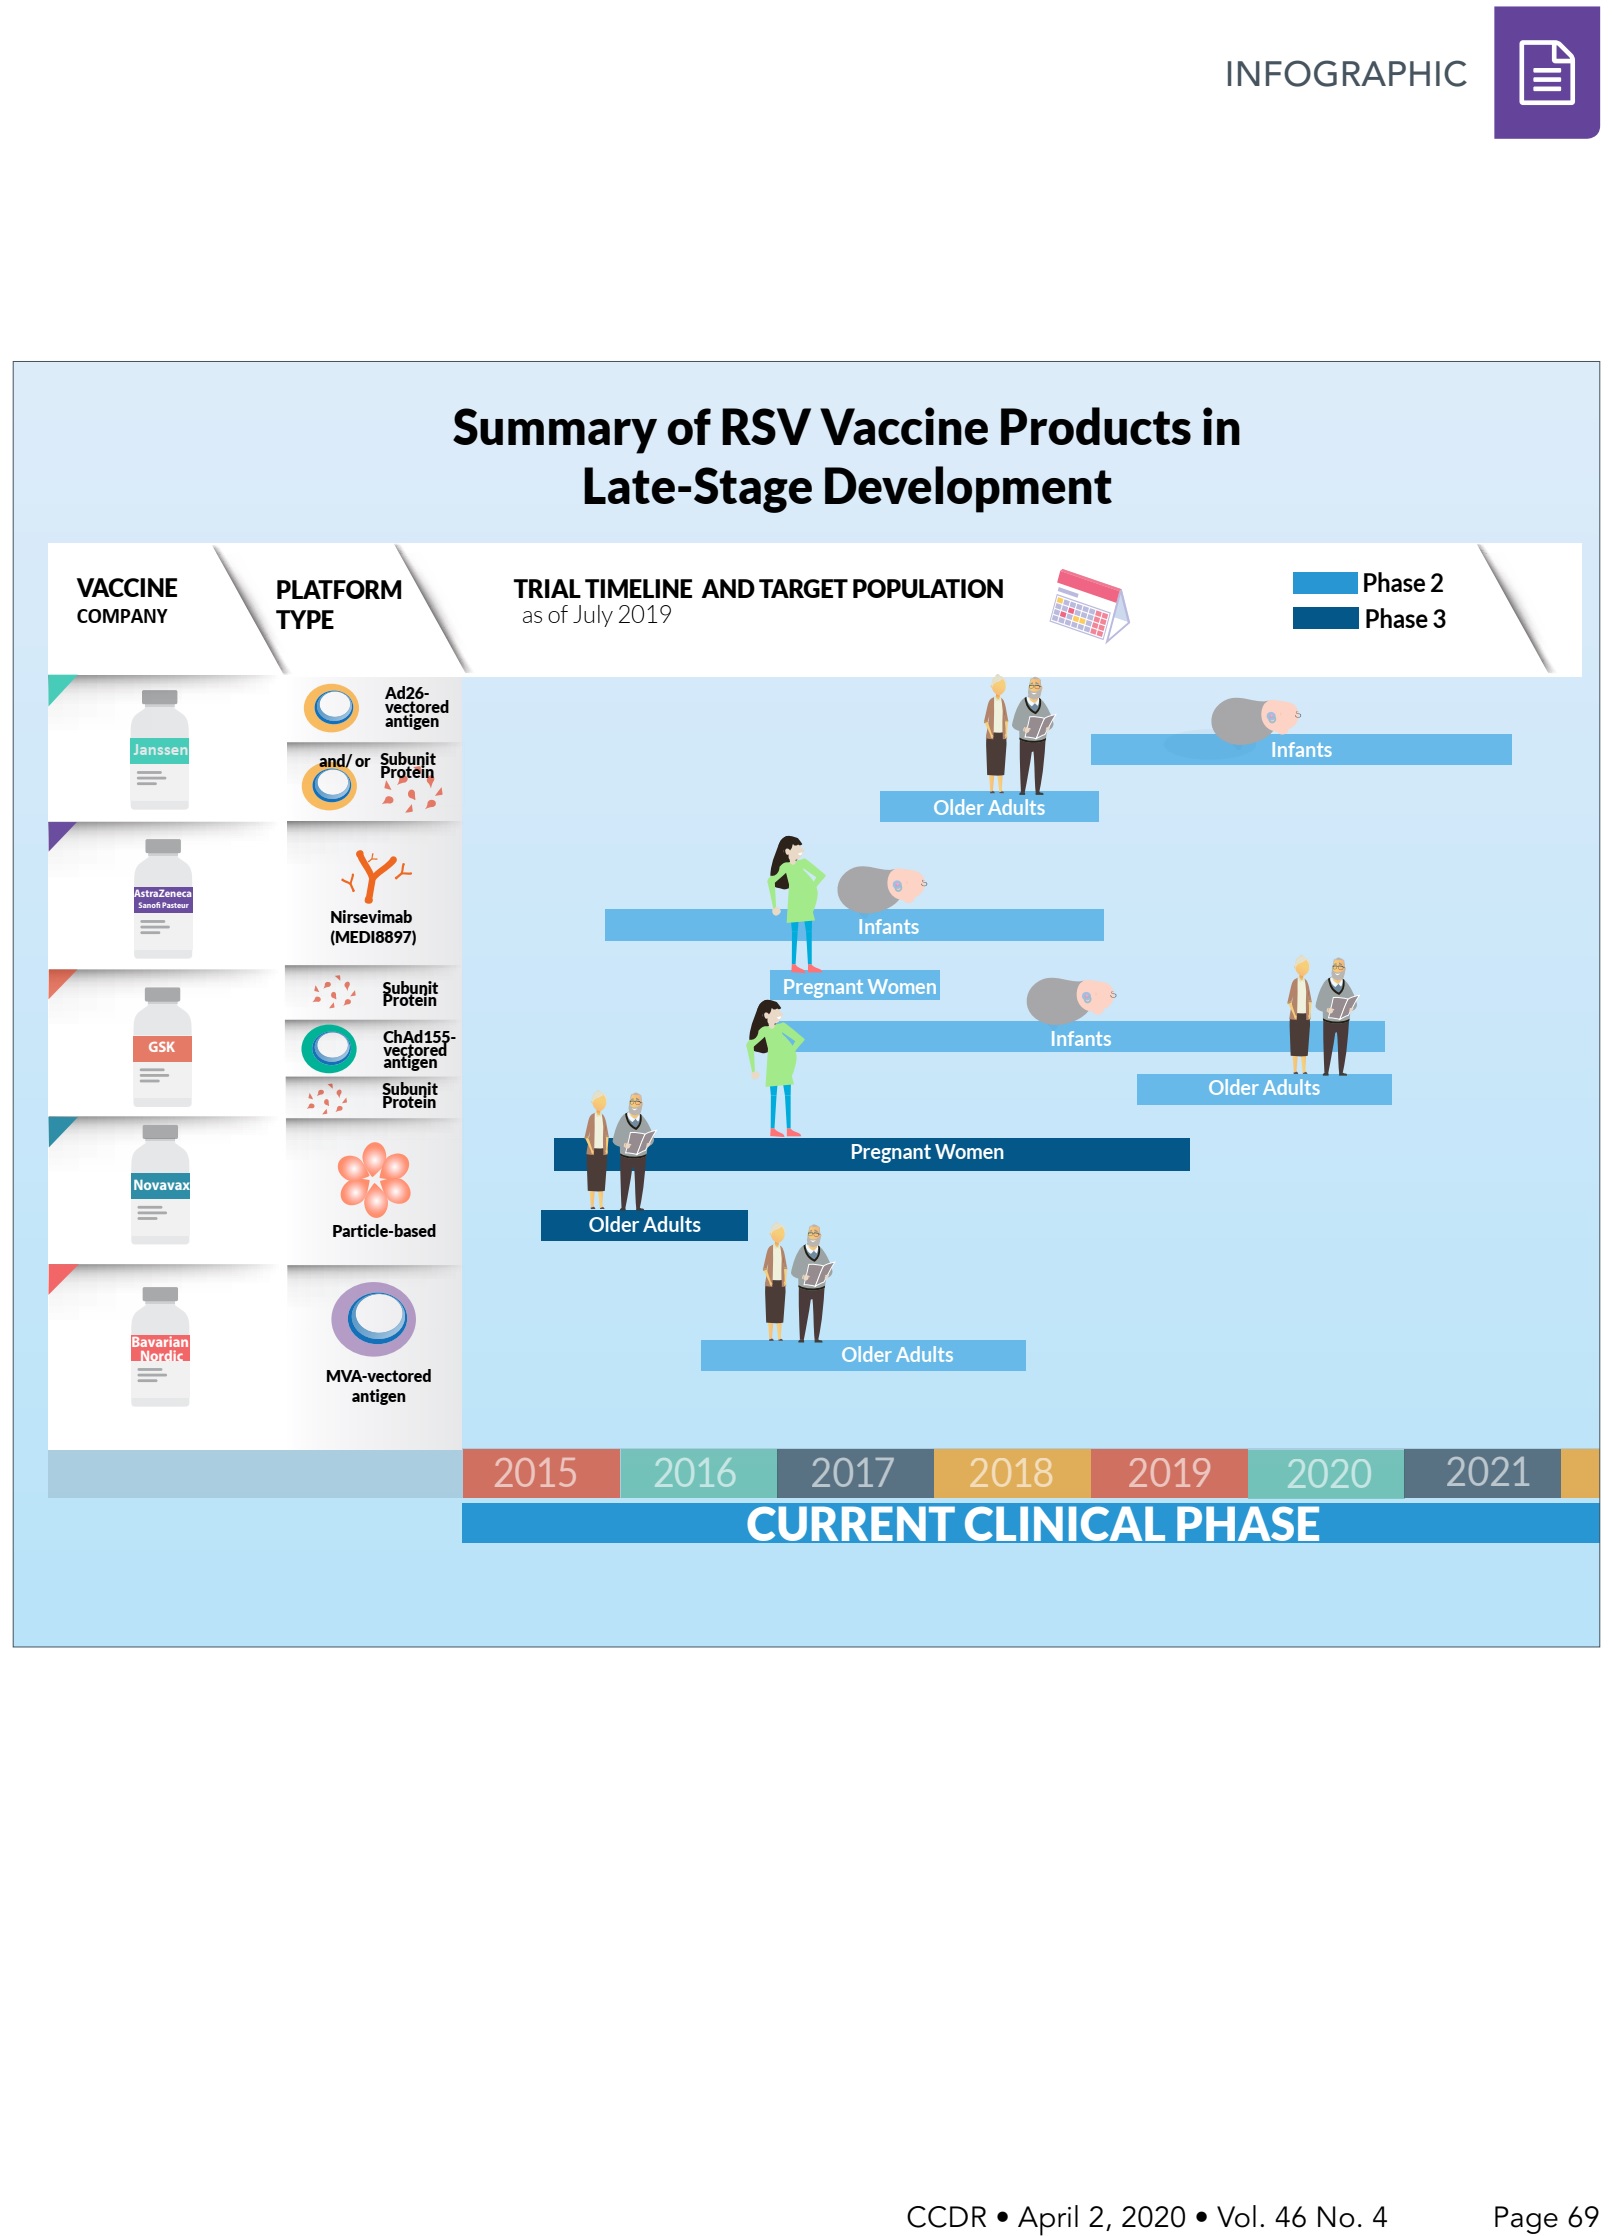 Summary of RSV vaccine products in late-stage development